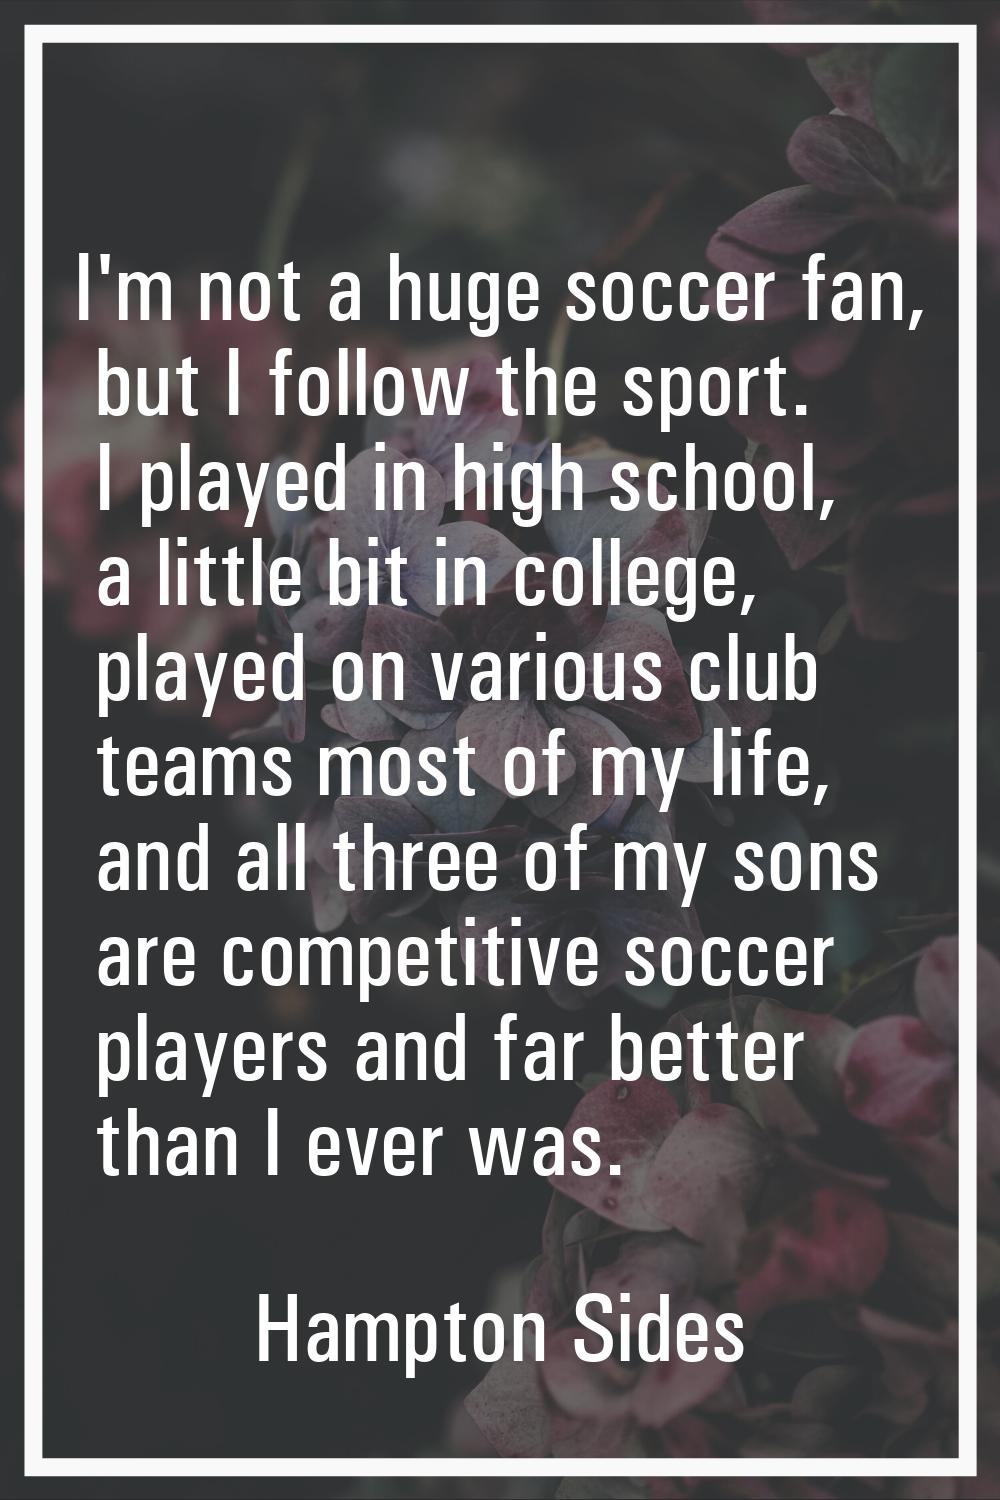 I'm not a huge soccer fan, but I follow the sport. I played in high school, a little bit in college